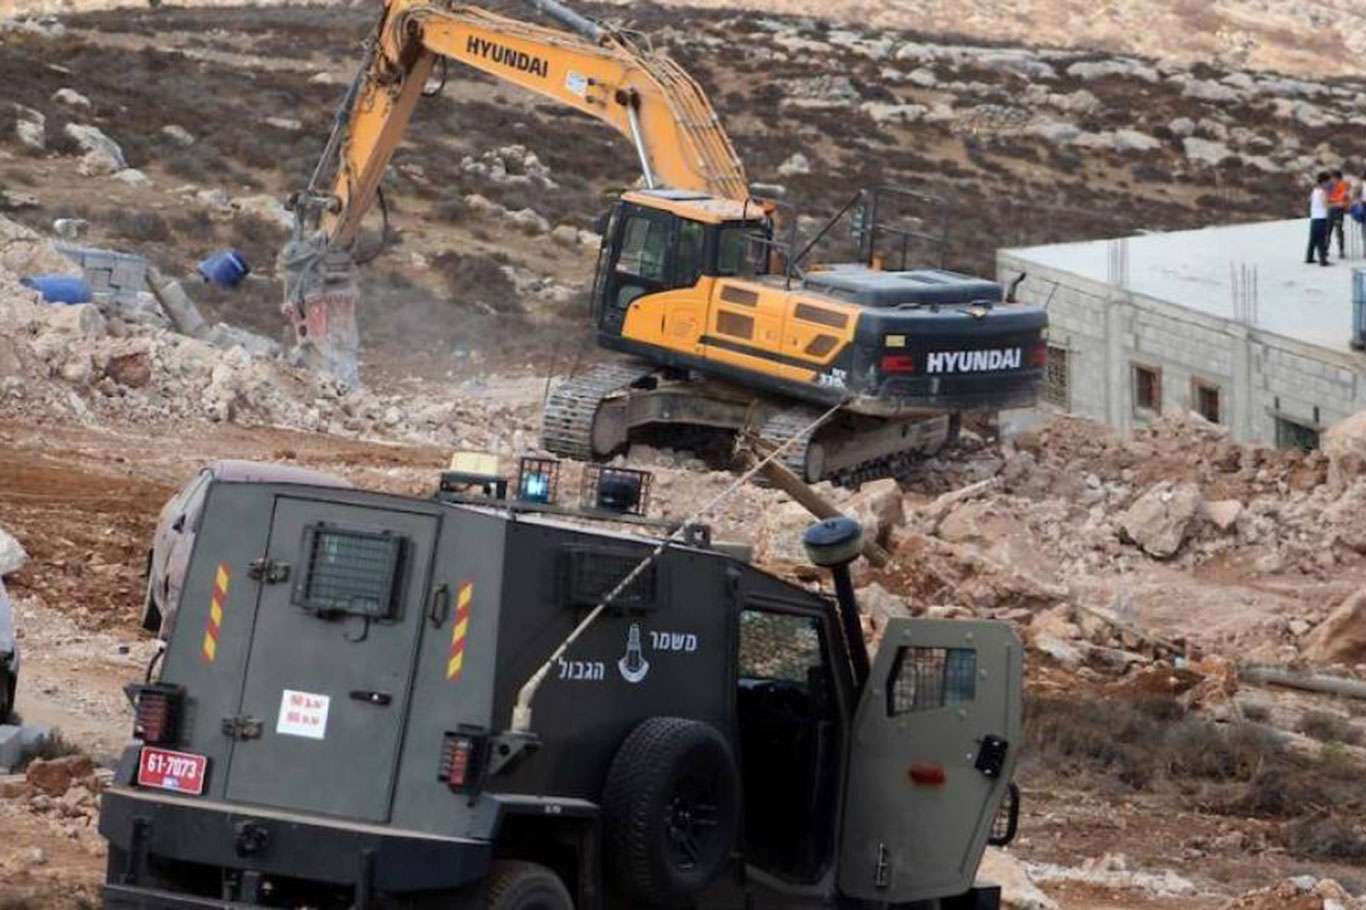 100 Palestinians displaced after zionist occupation demolished 129 structures in November